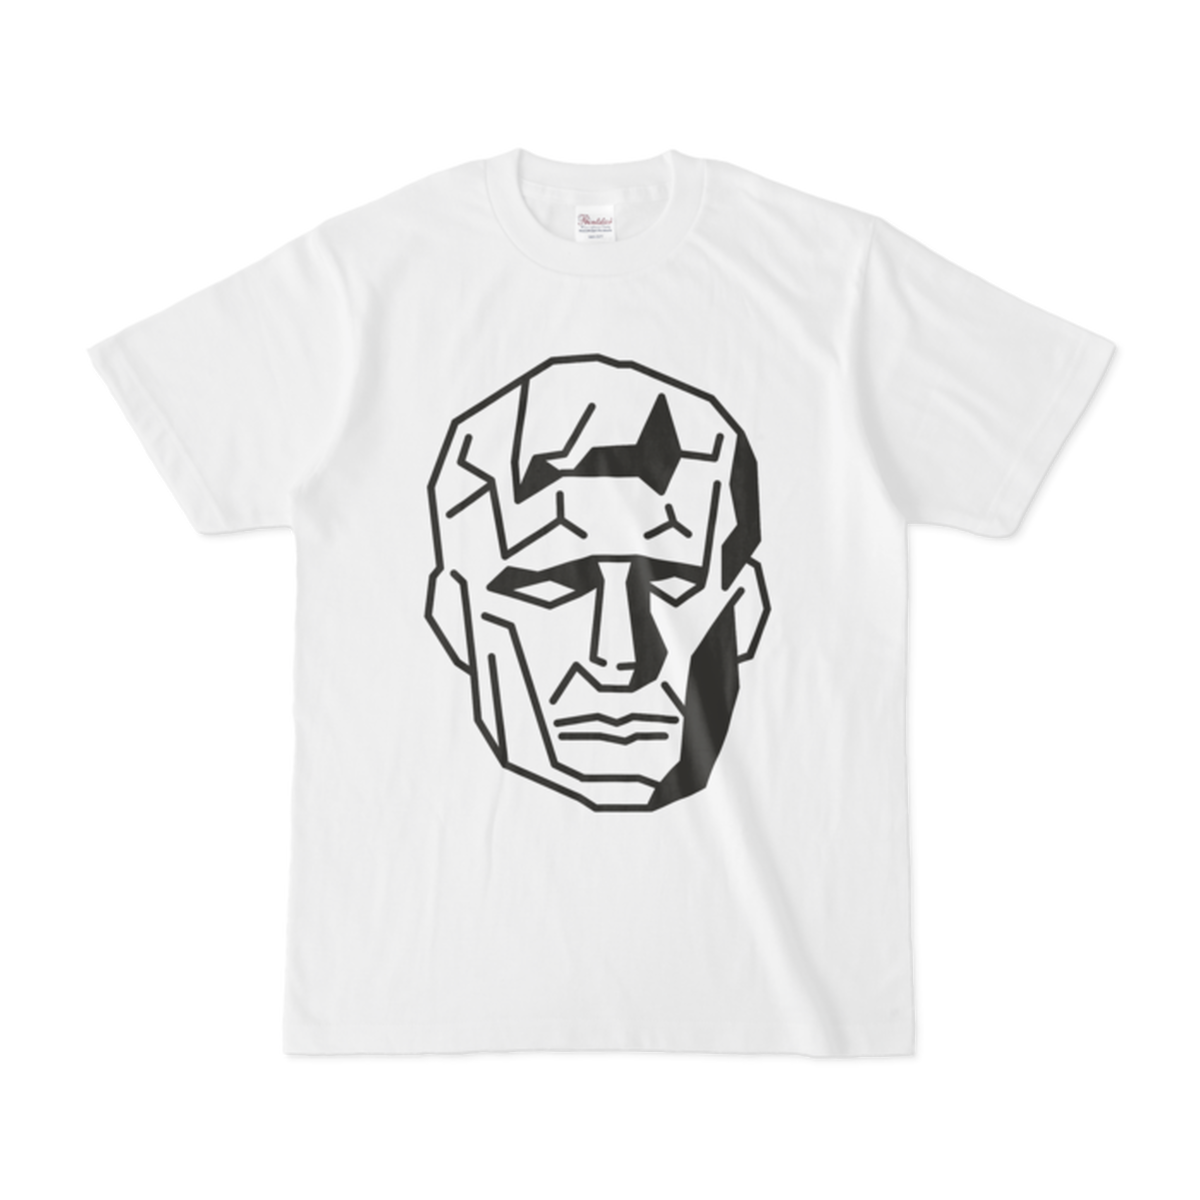 01 Agrippa アグリッパ Tシャツ Sacsac Cookie Cutter Museum Next Other Collection